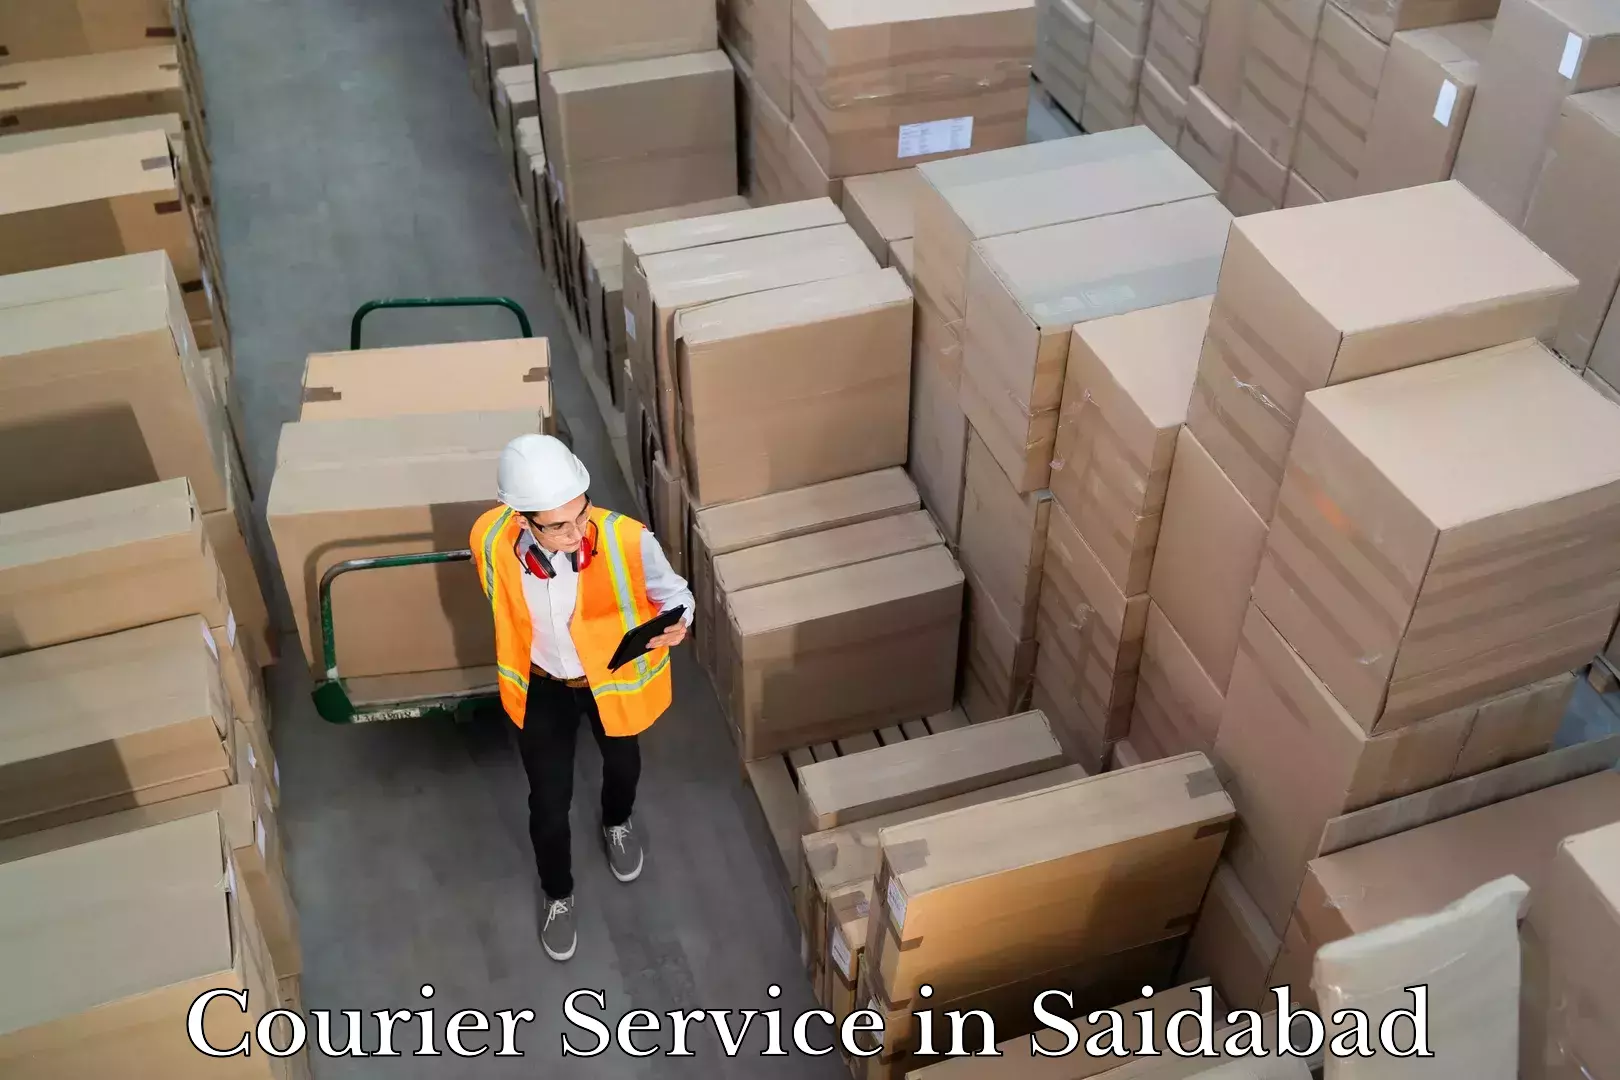 Efficient courier operations in Saidabad